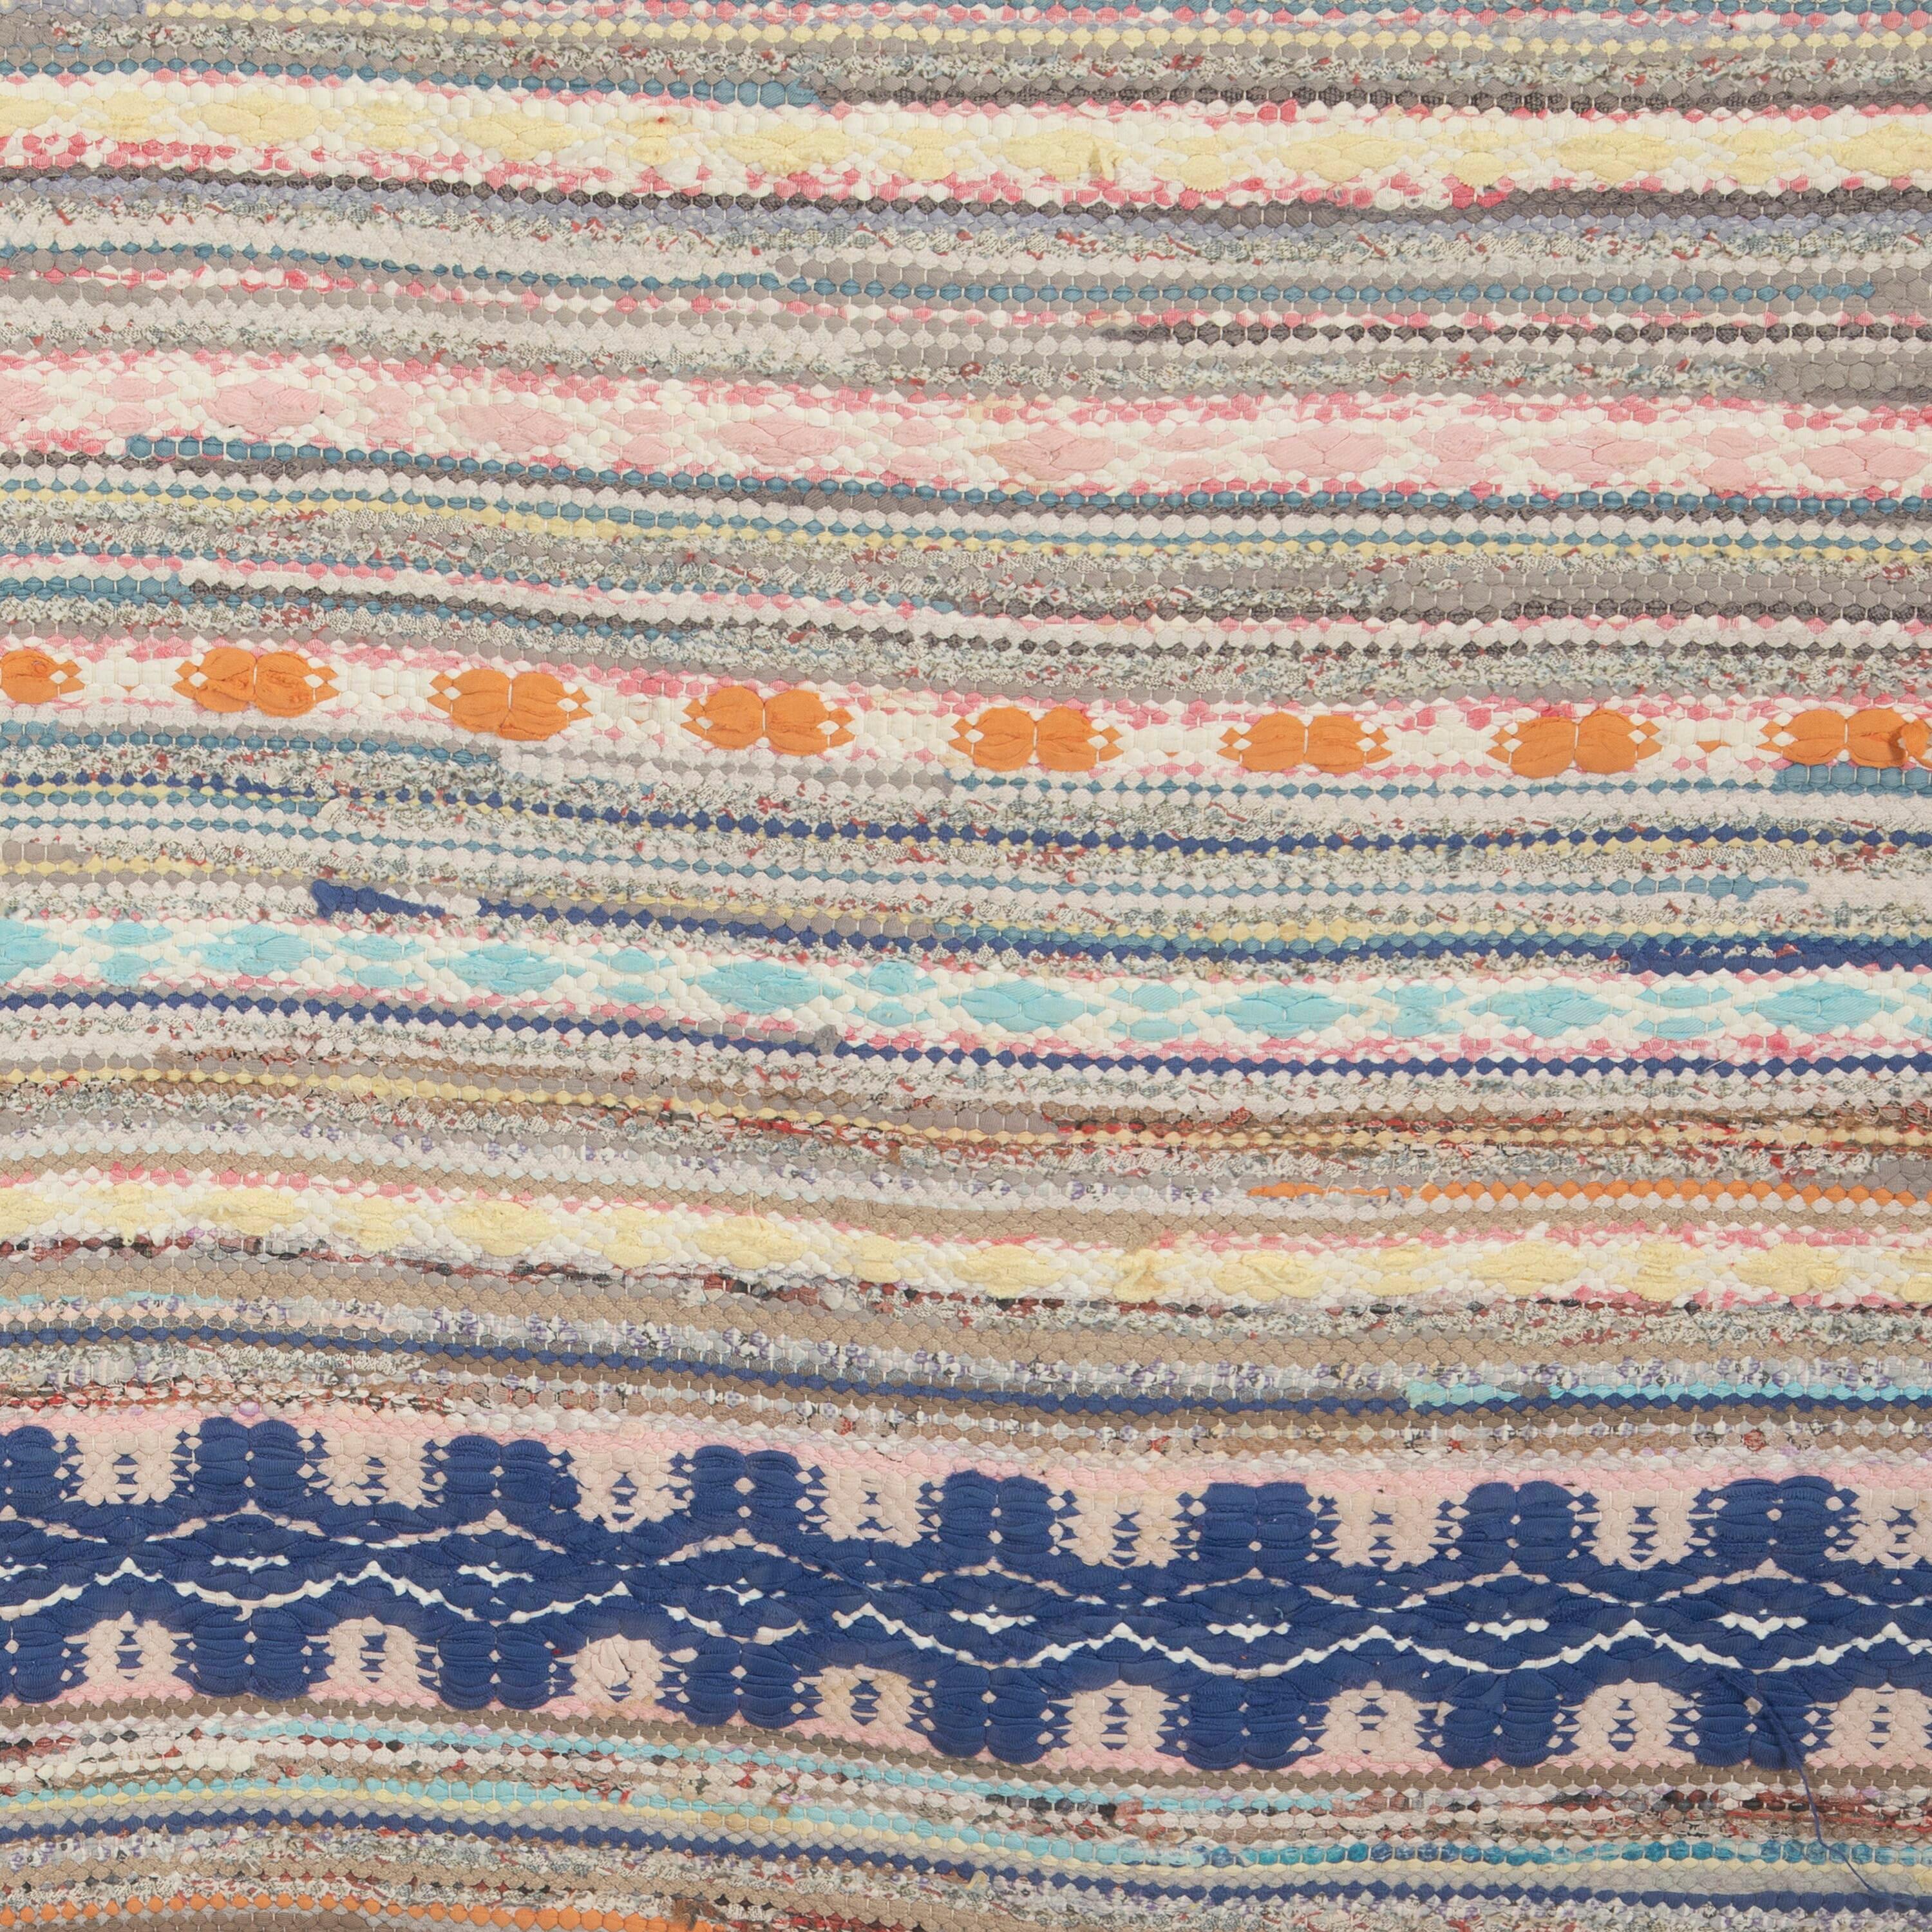 Traditional 20th century Swedish rag rug in tones of blue cream and rust,multi-pattern design. 
This rug has long proportions, ideal for use within a hallway or corridor. It features a dense pattern in a range of colours that have mellowed